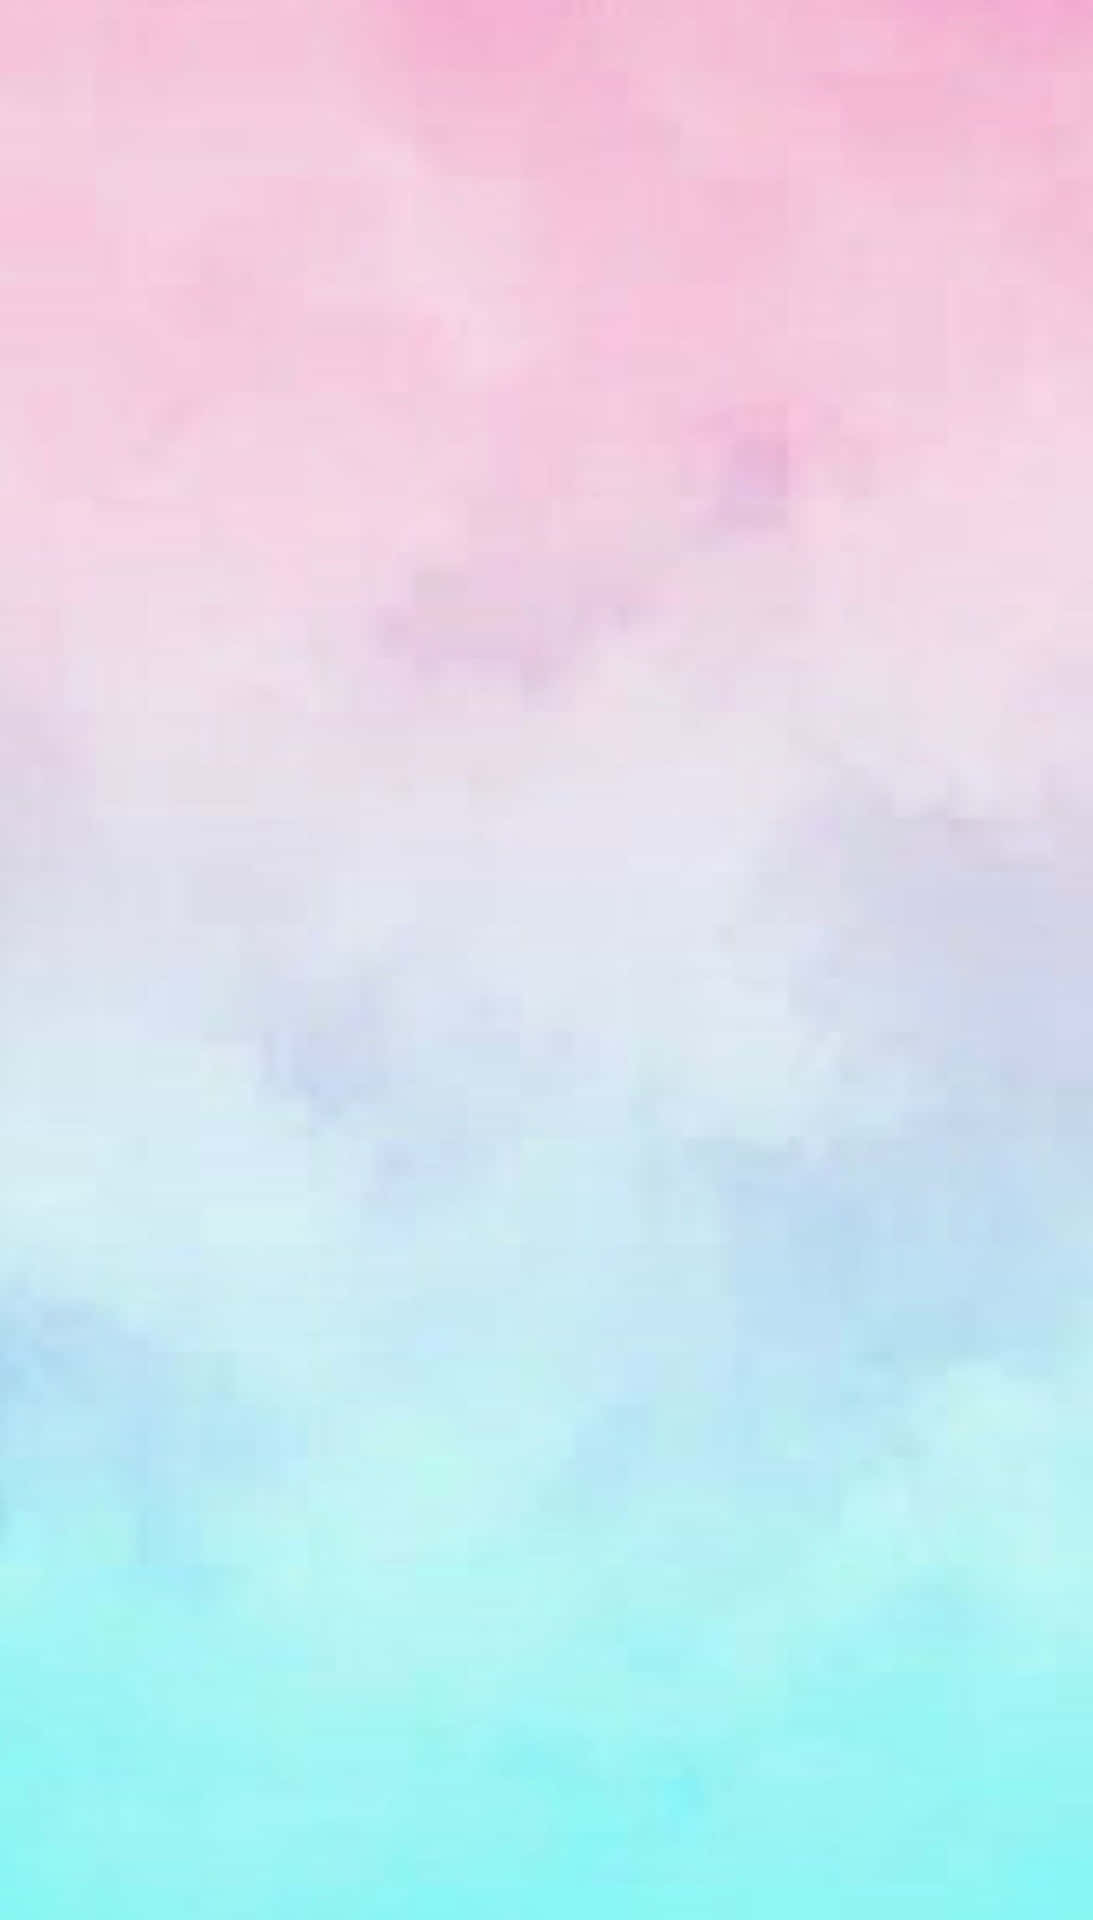 A Watercolor Background With Blue And Pink Clouds Wallpaper